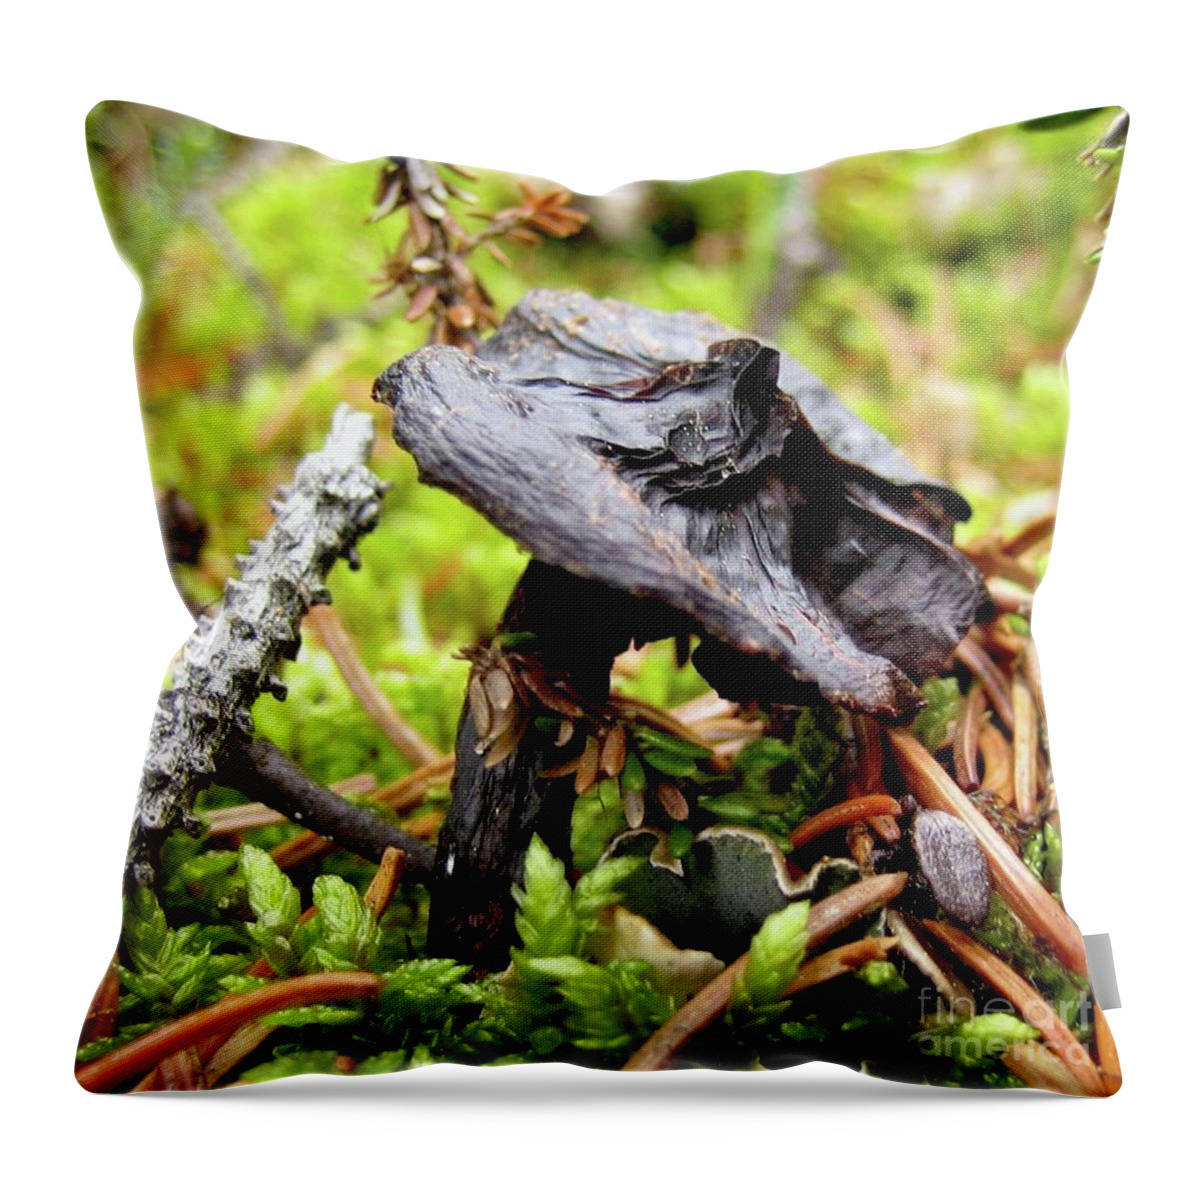 Mushroom Throw Pillow featuring the photograph Mushroom by 'REA' Gallery